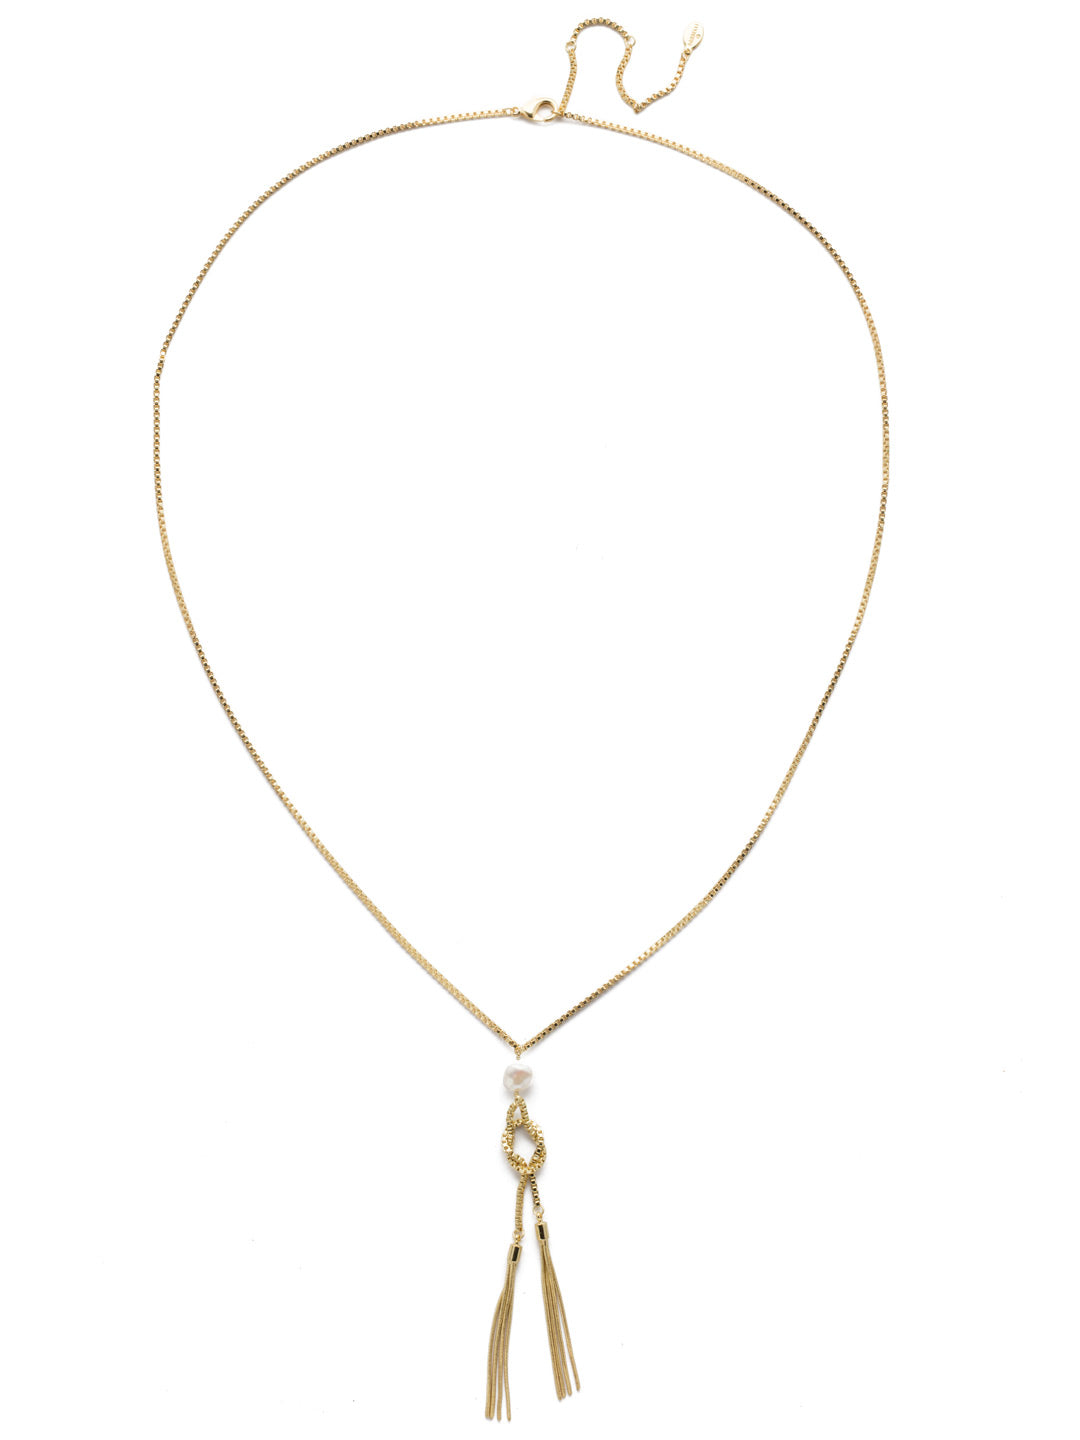 Raffaella Tassel Necklace Pendant Necklace - NEB18BGPLP - <p>Tie up the loose ends. This long strand necklace features two tassels attached to a box chain, square knot. All hung effortlessly from a natural pearl. From Sorrelli's Polished Pearl collection in our Bright Gold-tone finish.</p>